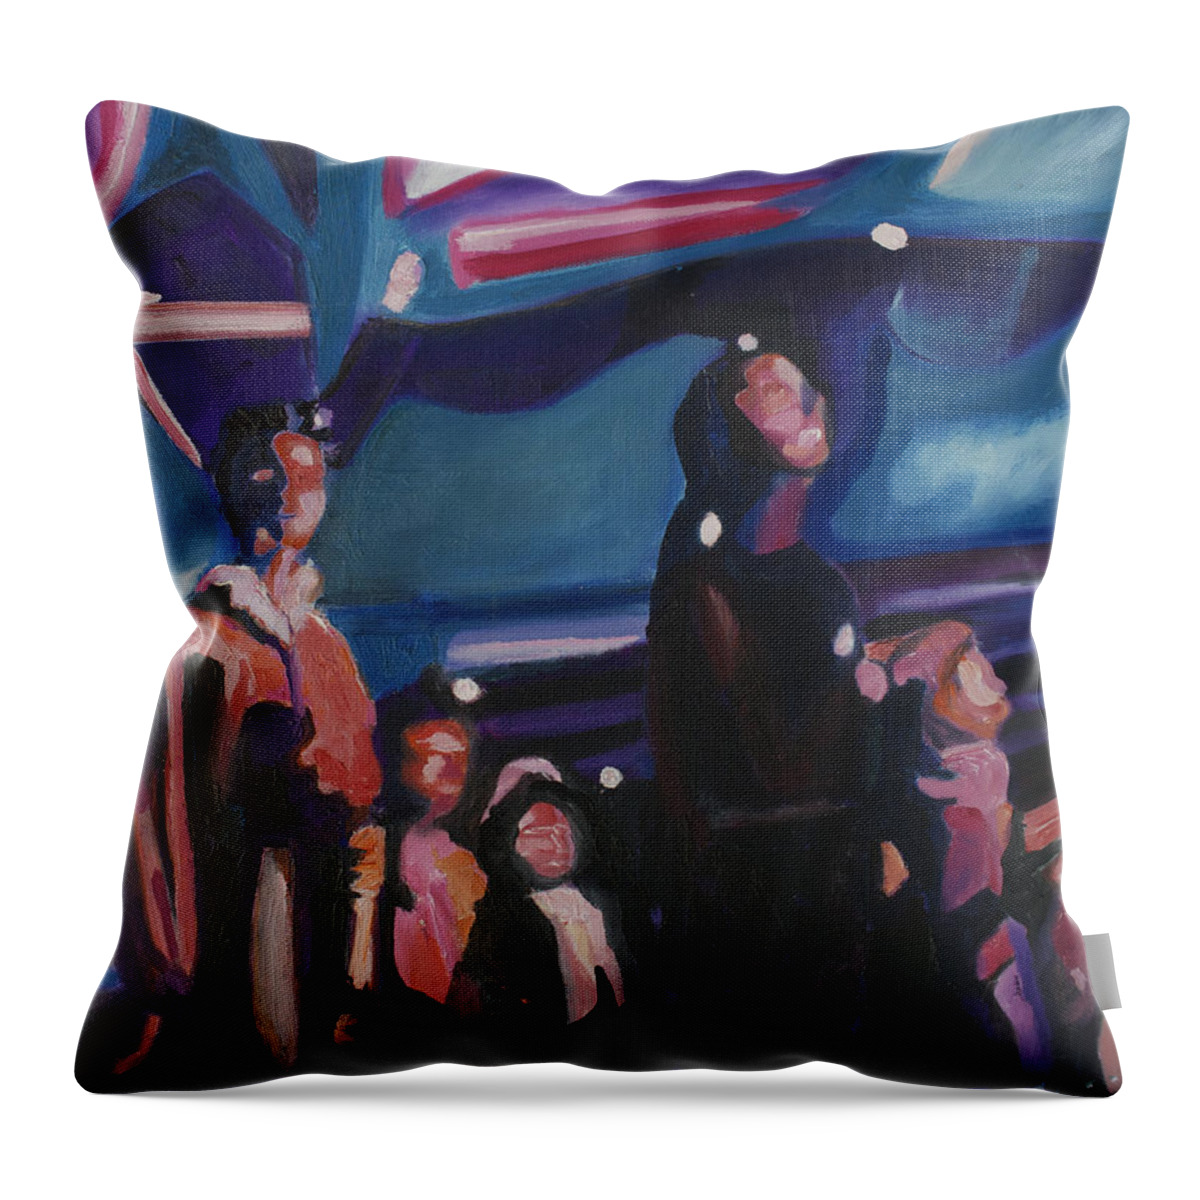 Night Scenes Throw Pillow featuring the painting Watching Alex Grey II by Patricia Arroyo